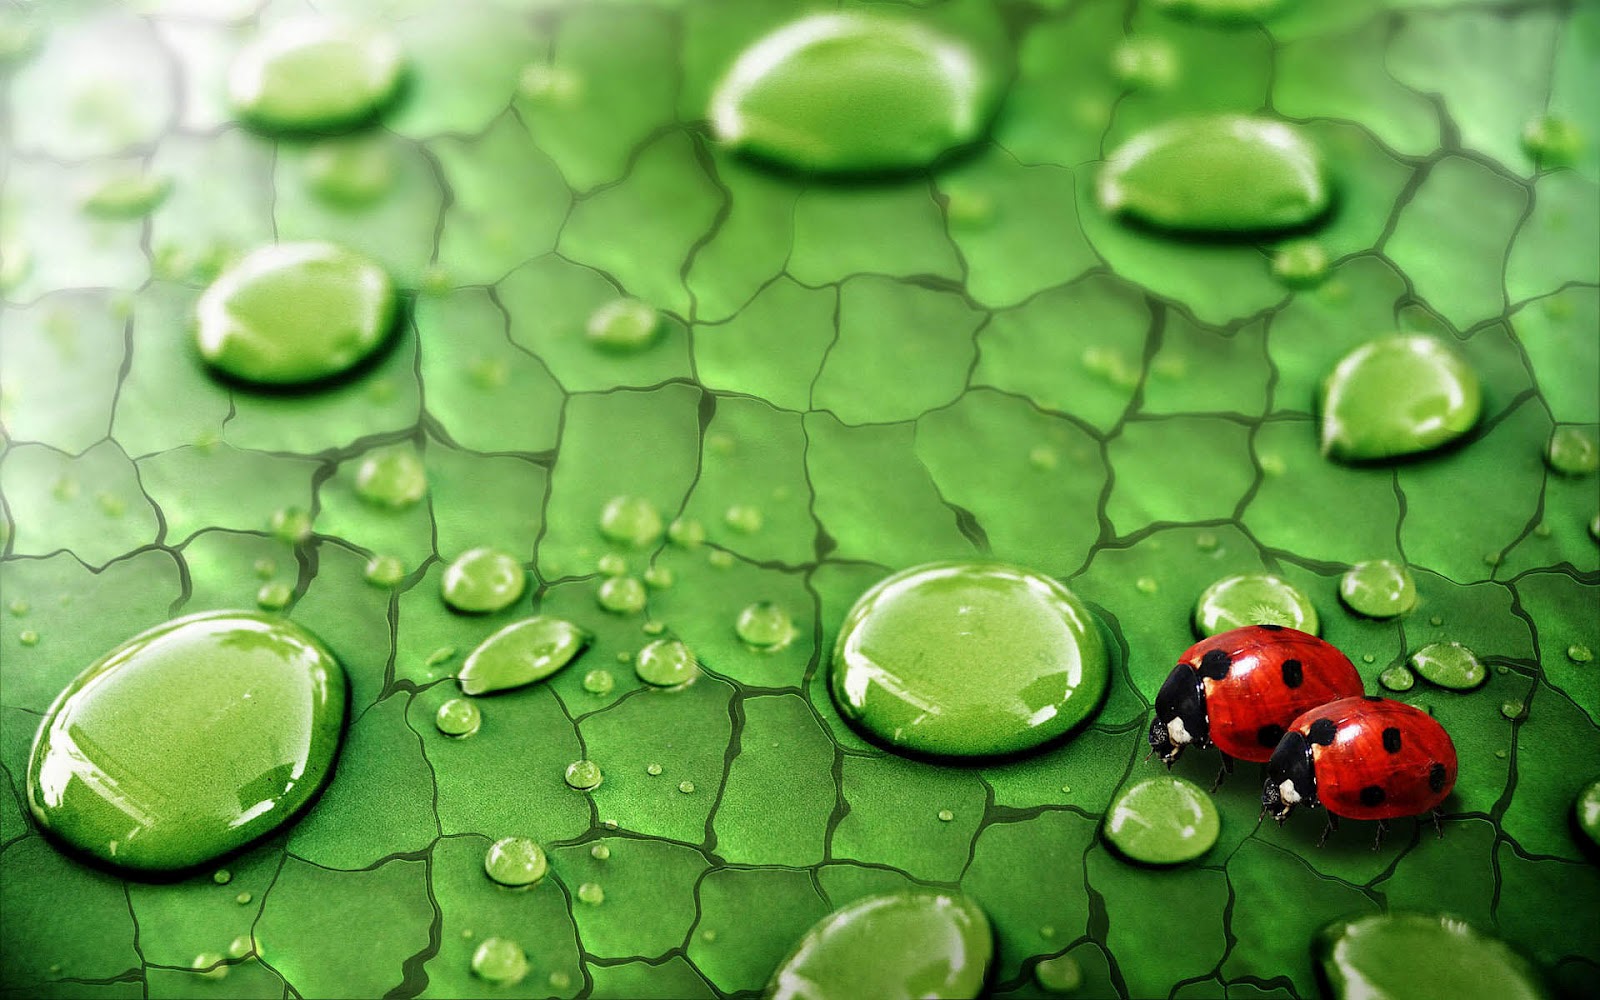 http://1.bp.blogspot.com/-cZCmVxKo548/UDkSNgaUIYI/AAAAAAAABH8/UQKrbeM9orY/s1600/hd-ladybug-wallpaper-with-two-ladybugs-walking-on-a-leaf-with-water-drops-wallpapers-backgrounds-pictures-photos.jpg.jpg